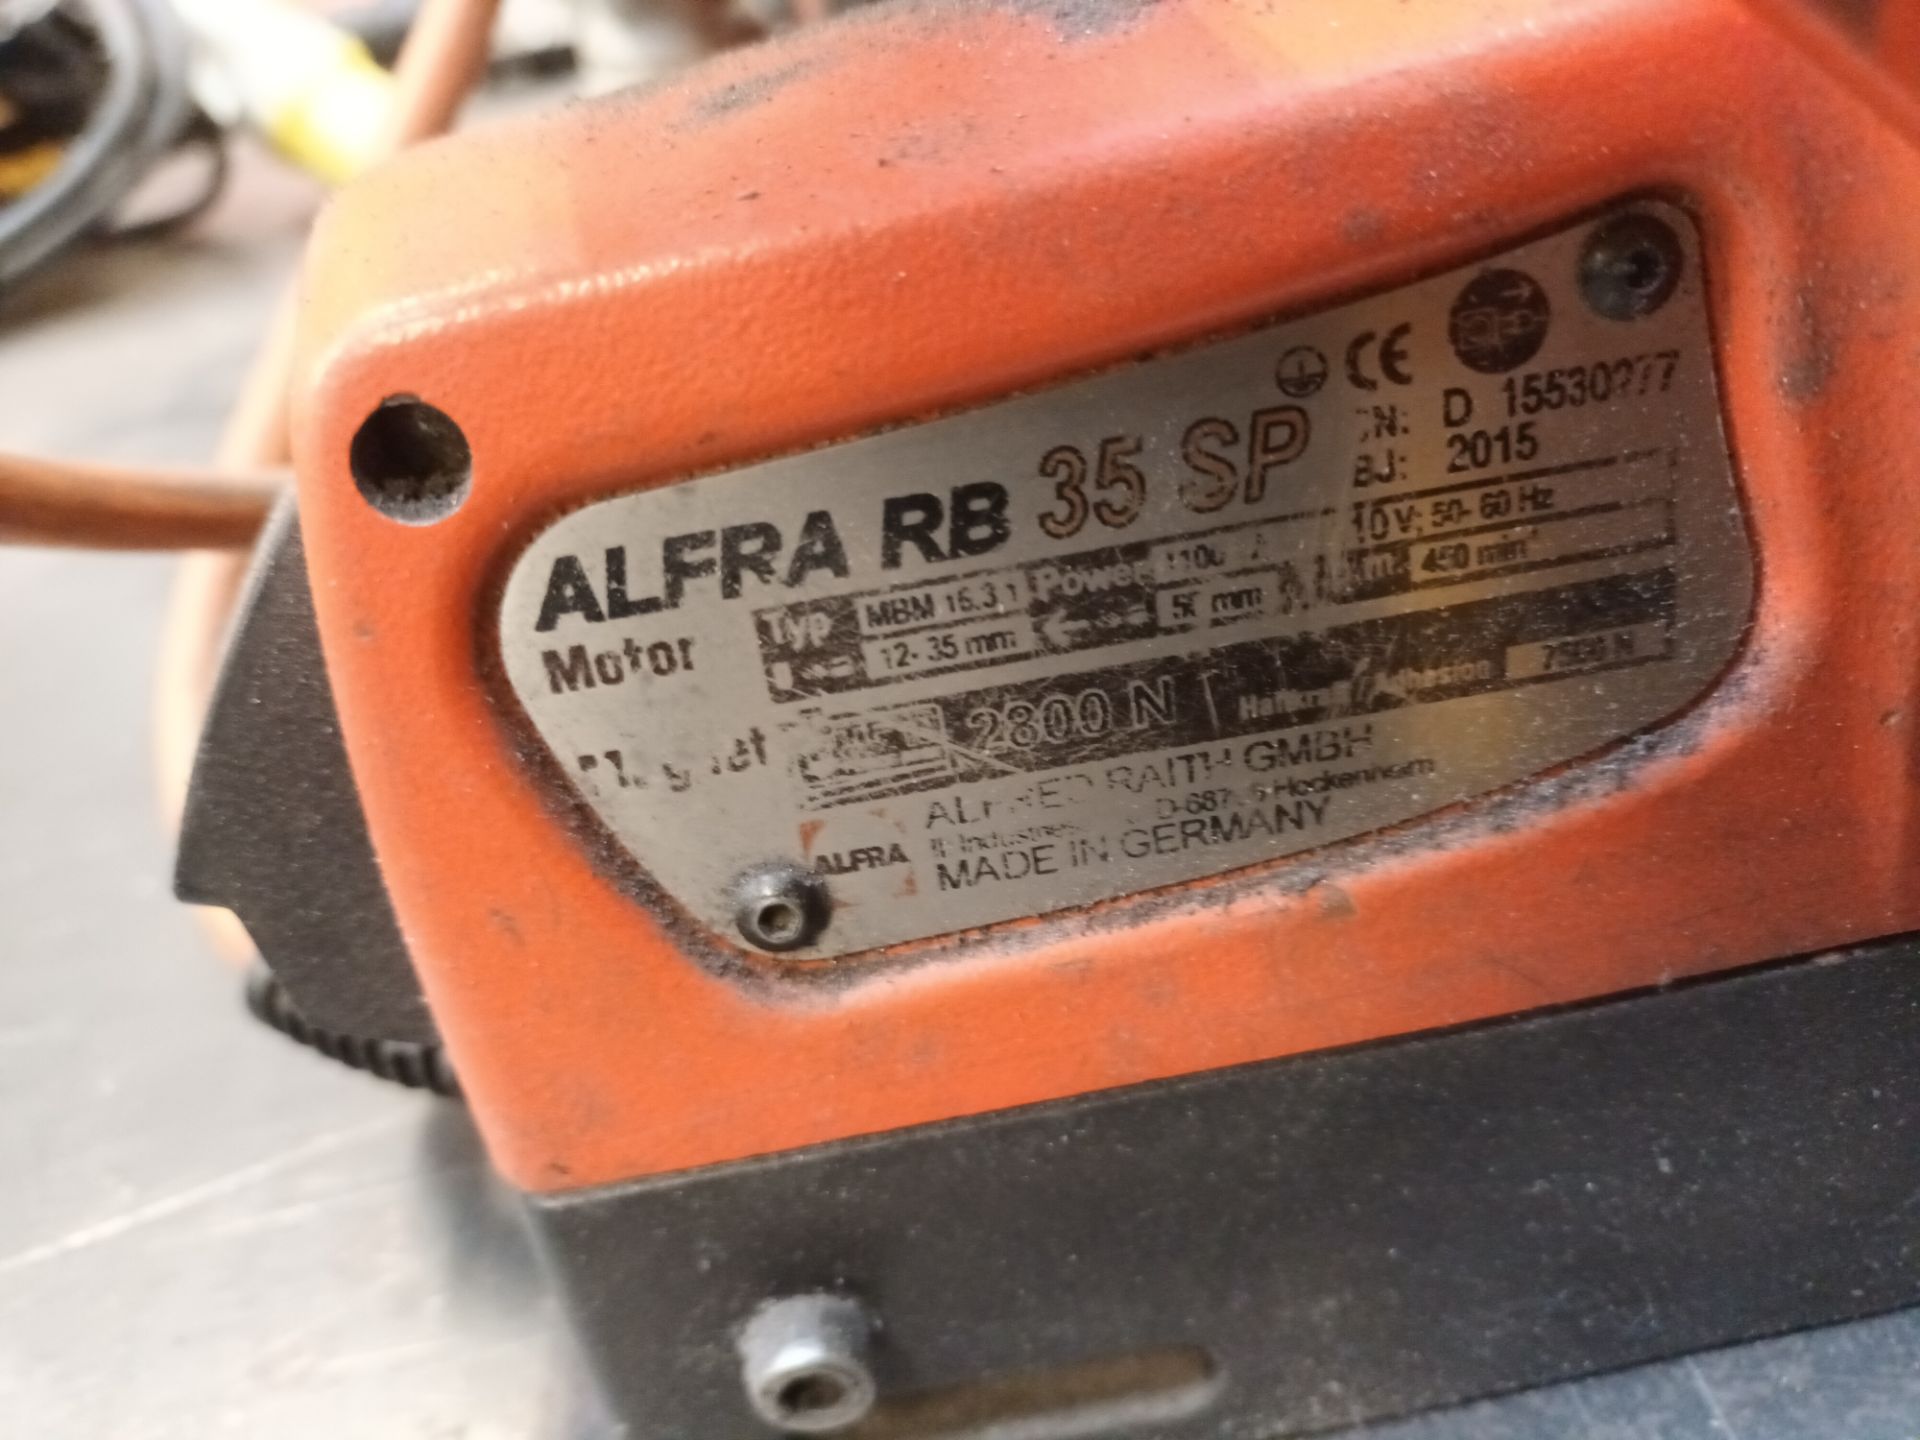 Alfra RB 35 SP magnetic drilling machine - Image 3 of 4